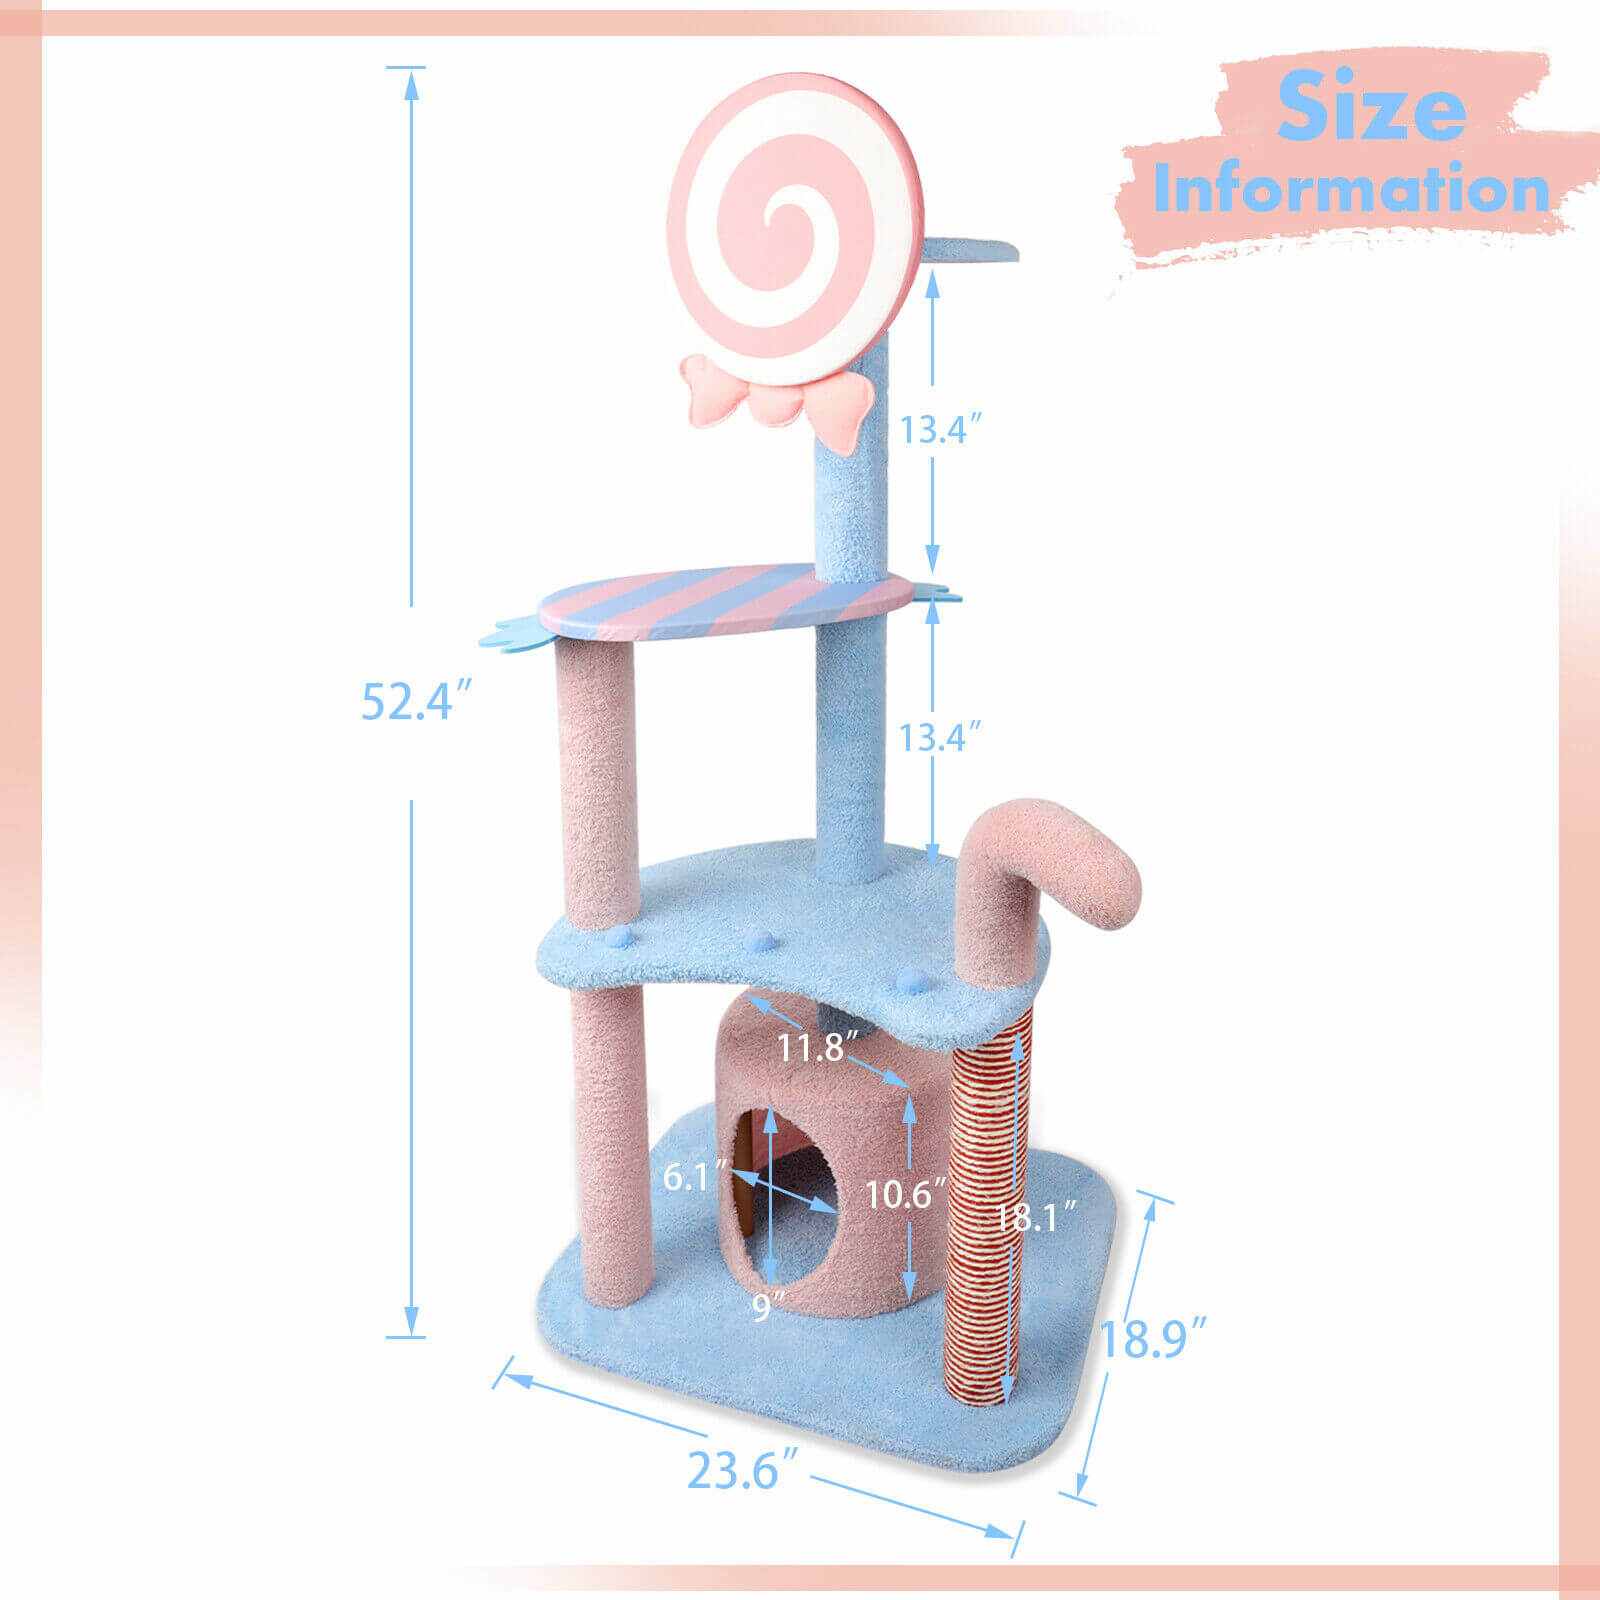 Size of durable 52.4" Cat Tower Condo Furniture Candy Shape